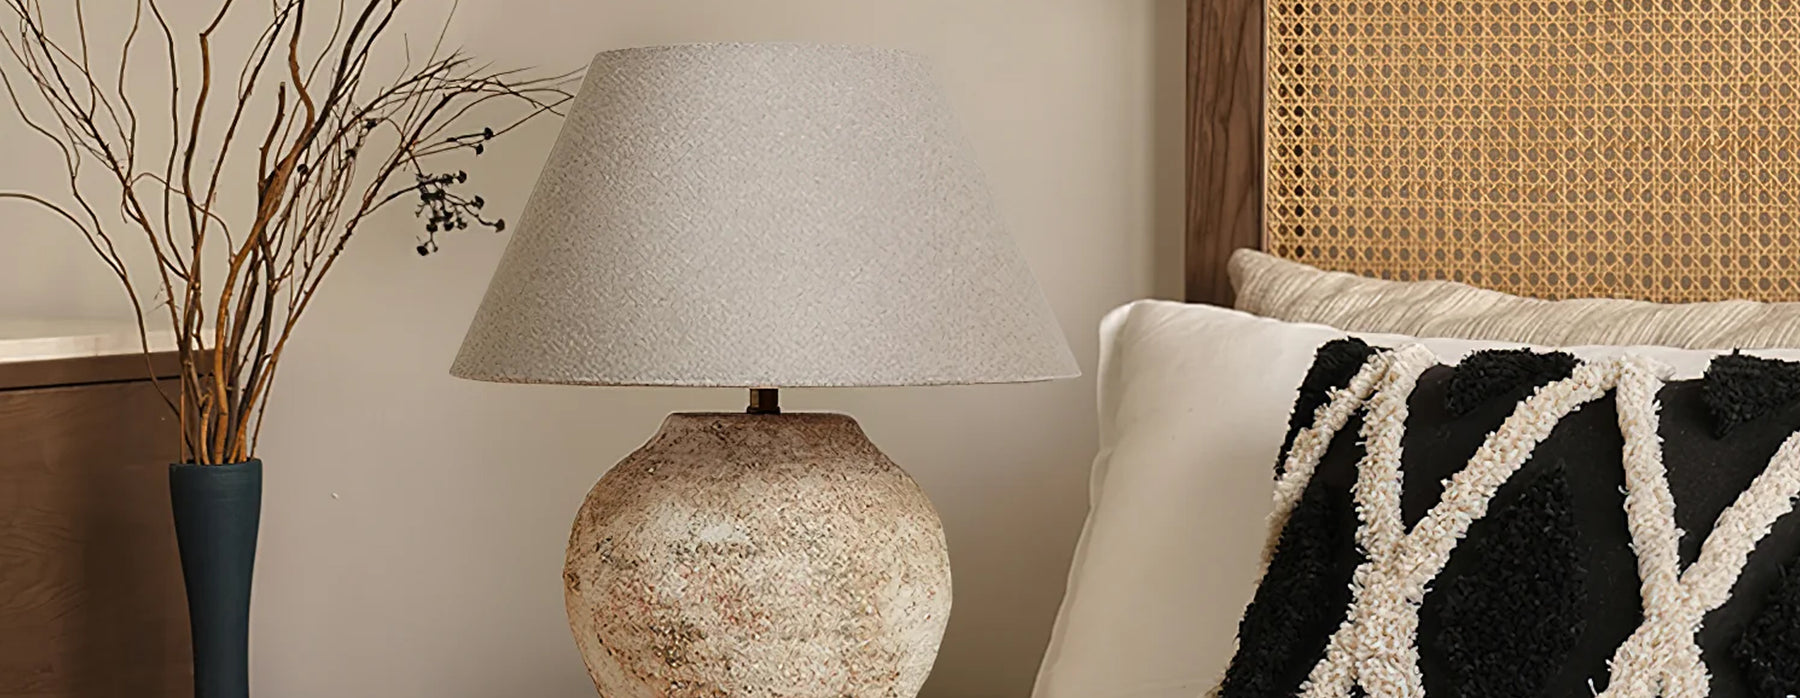 Transform Your Home with Elegant Ceramic Table Lamps